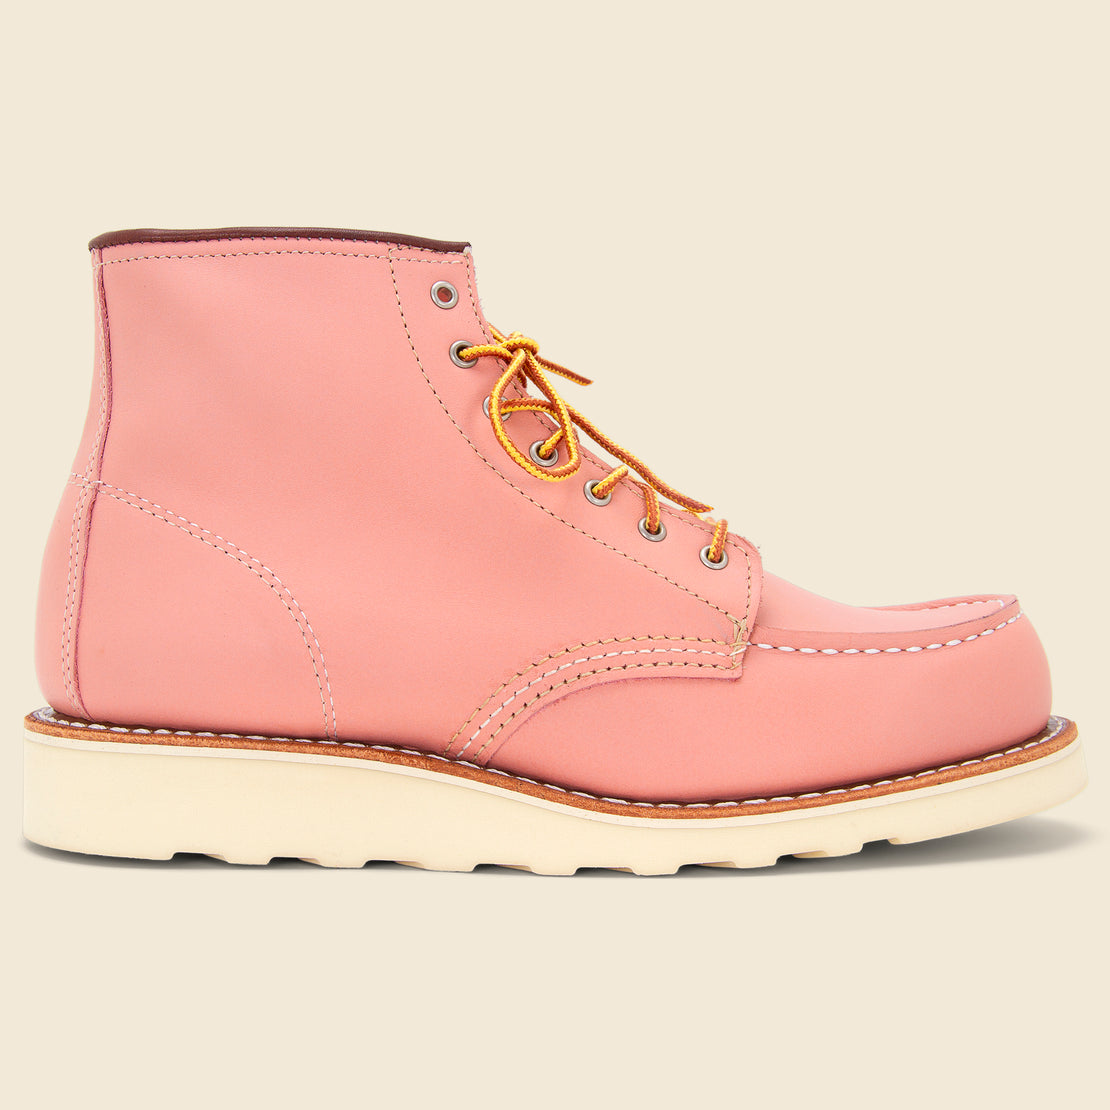 Red Wing 6" Moc Toe No. 3387 - Rose